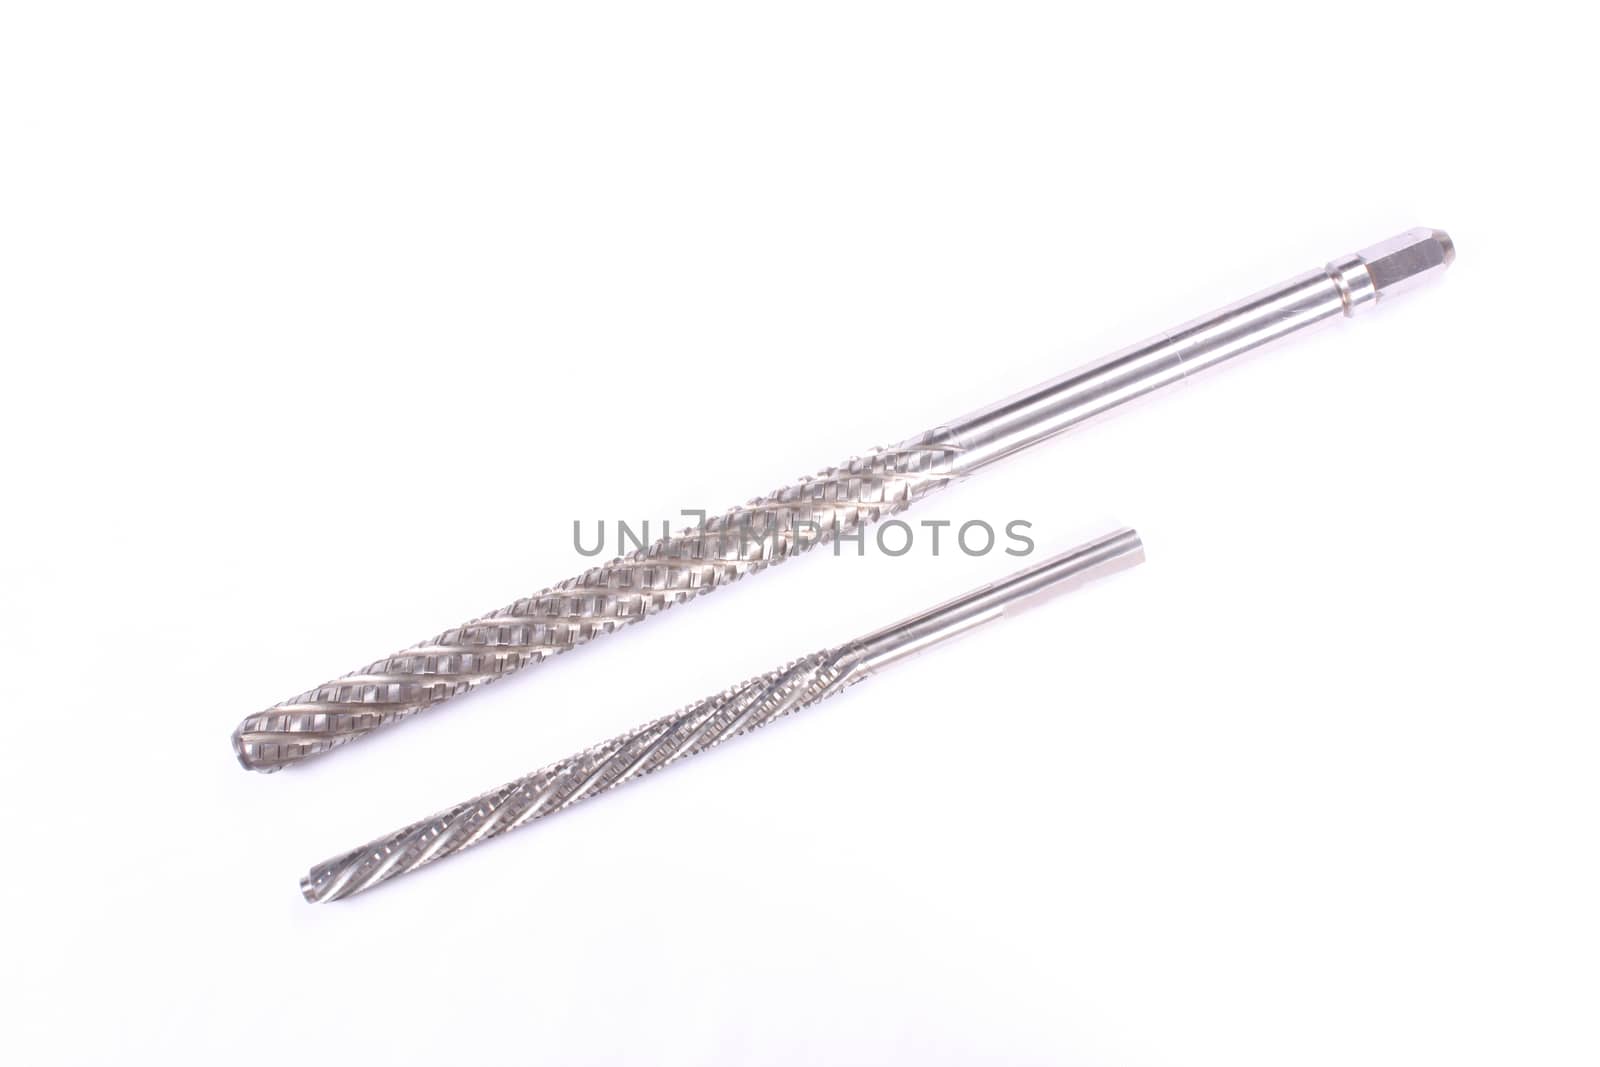 A pair of well designed industrial broaches used in automobile machinery, on white studio background.